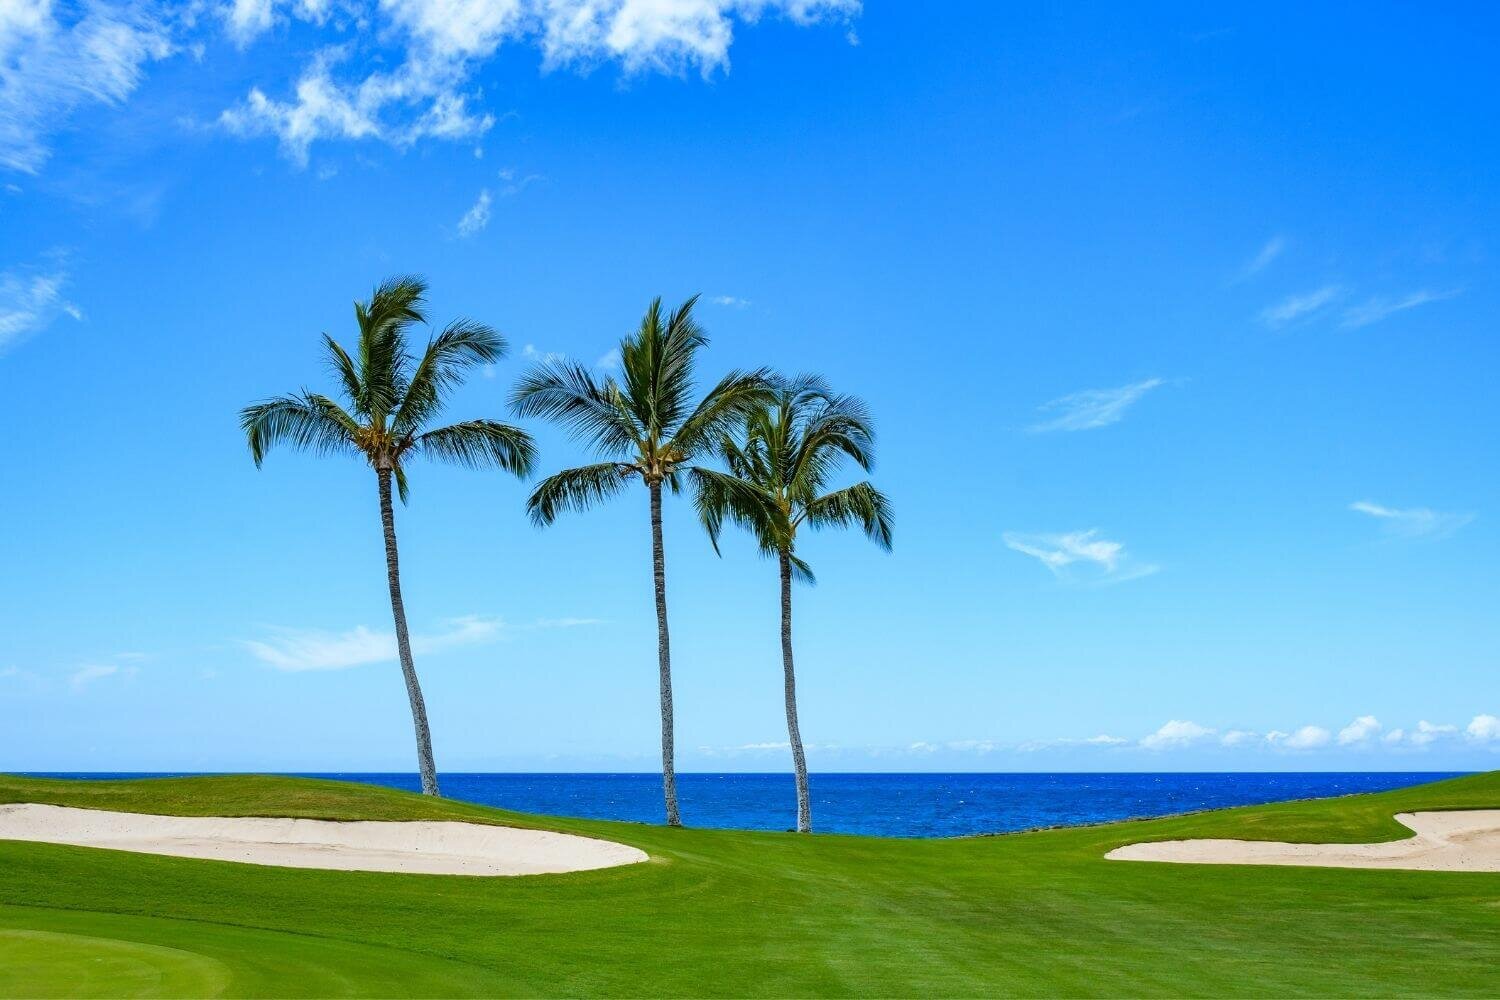 Tropical golf course with palm trees near ocean